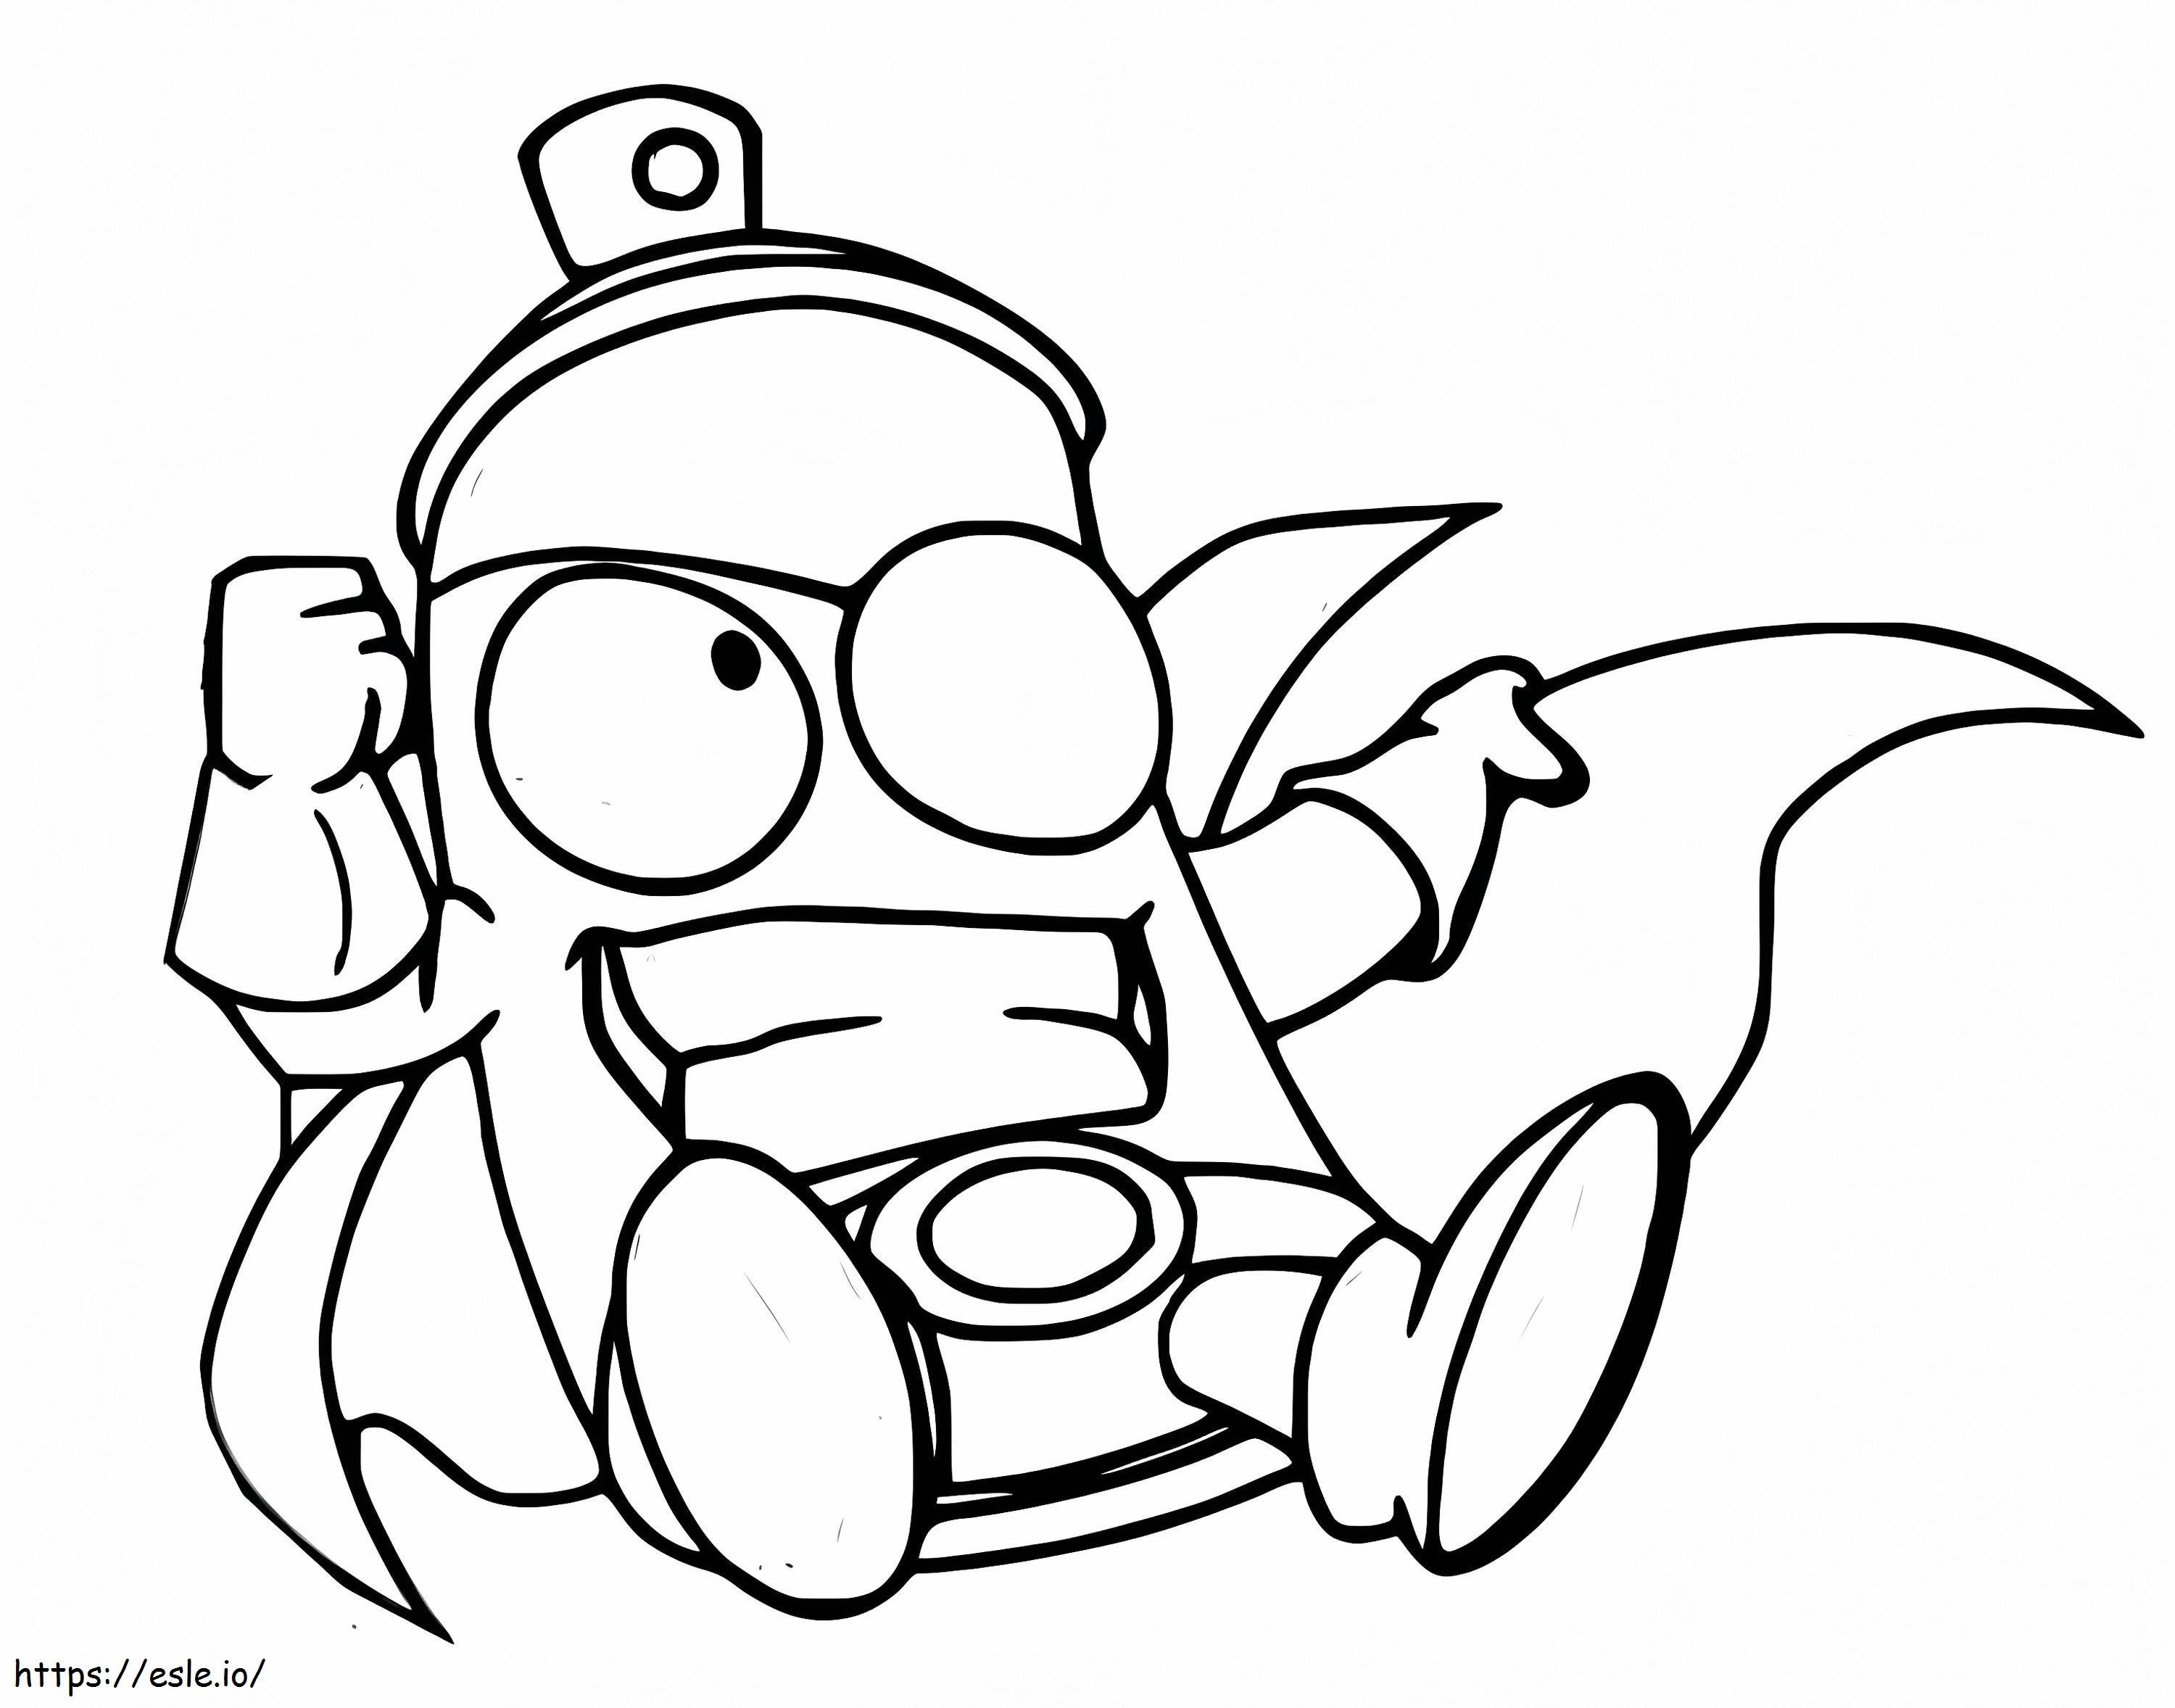 Tag Black Superzings coloring page